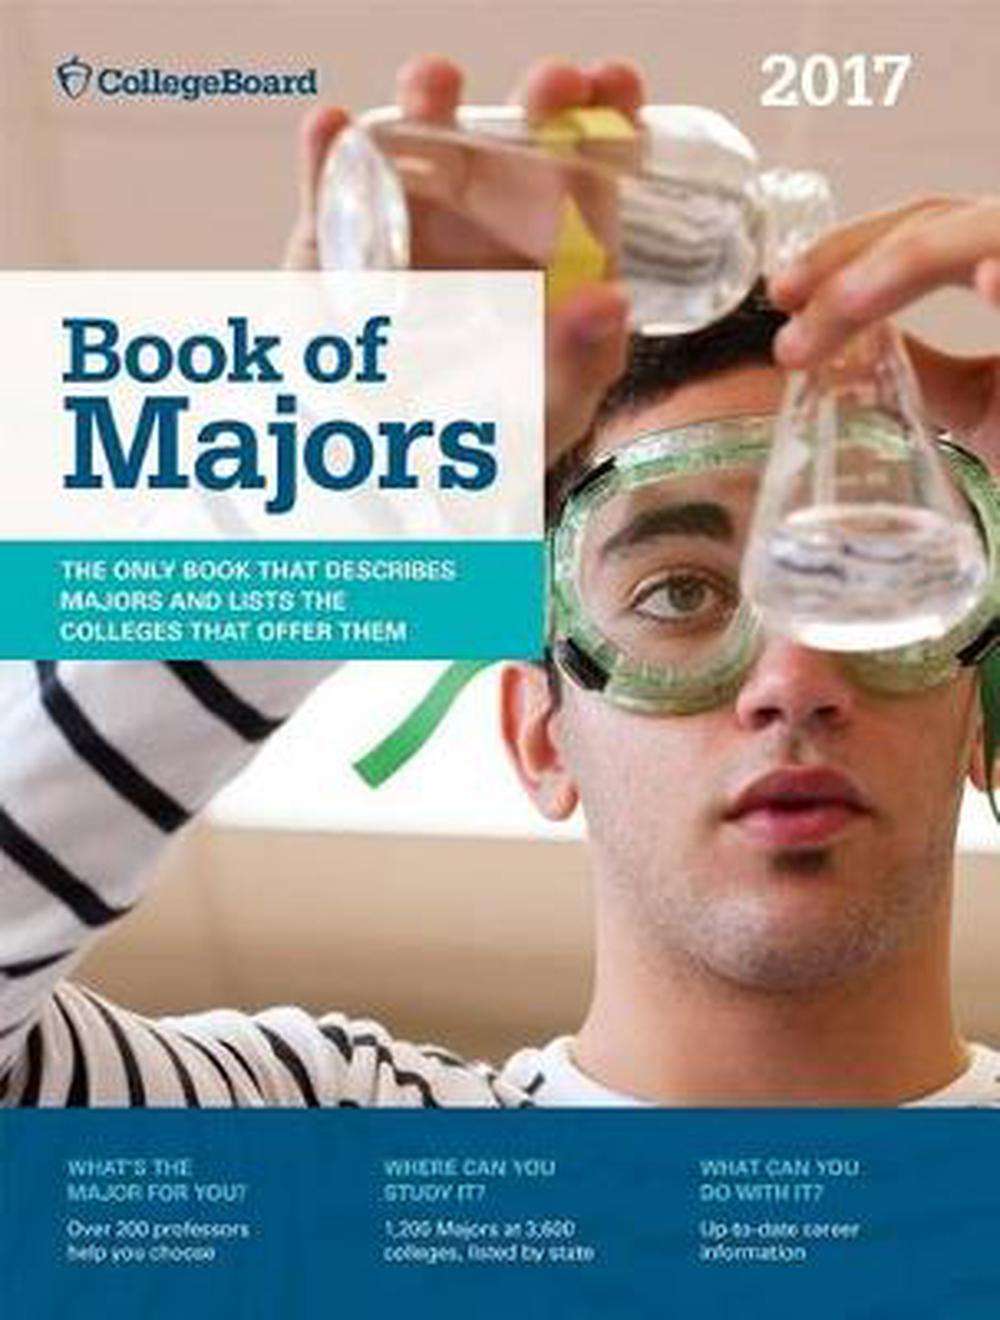 Book of Majors by College Board, Paperback, 9781457307744